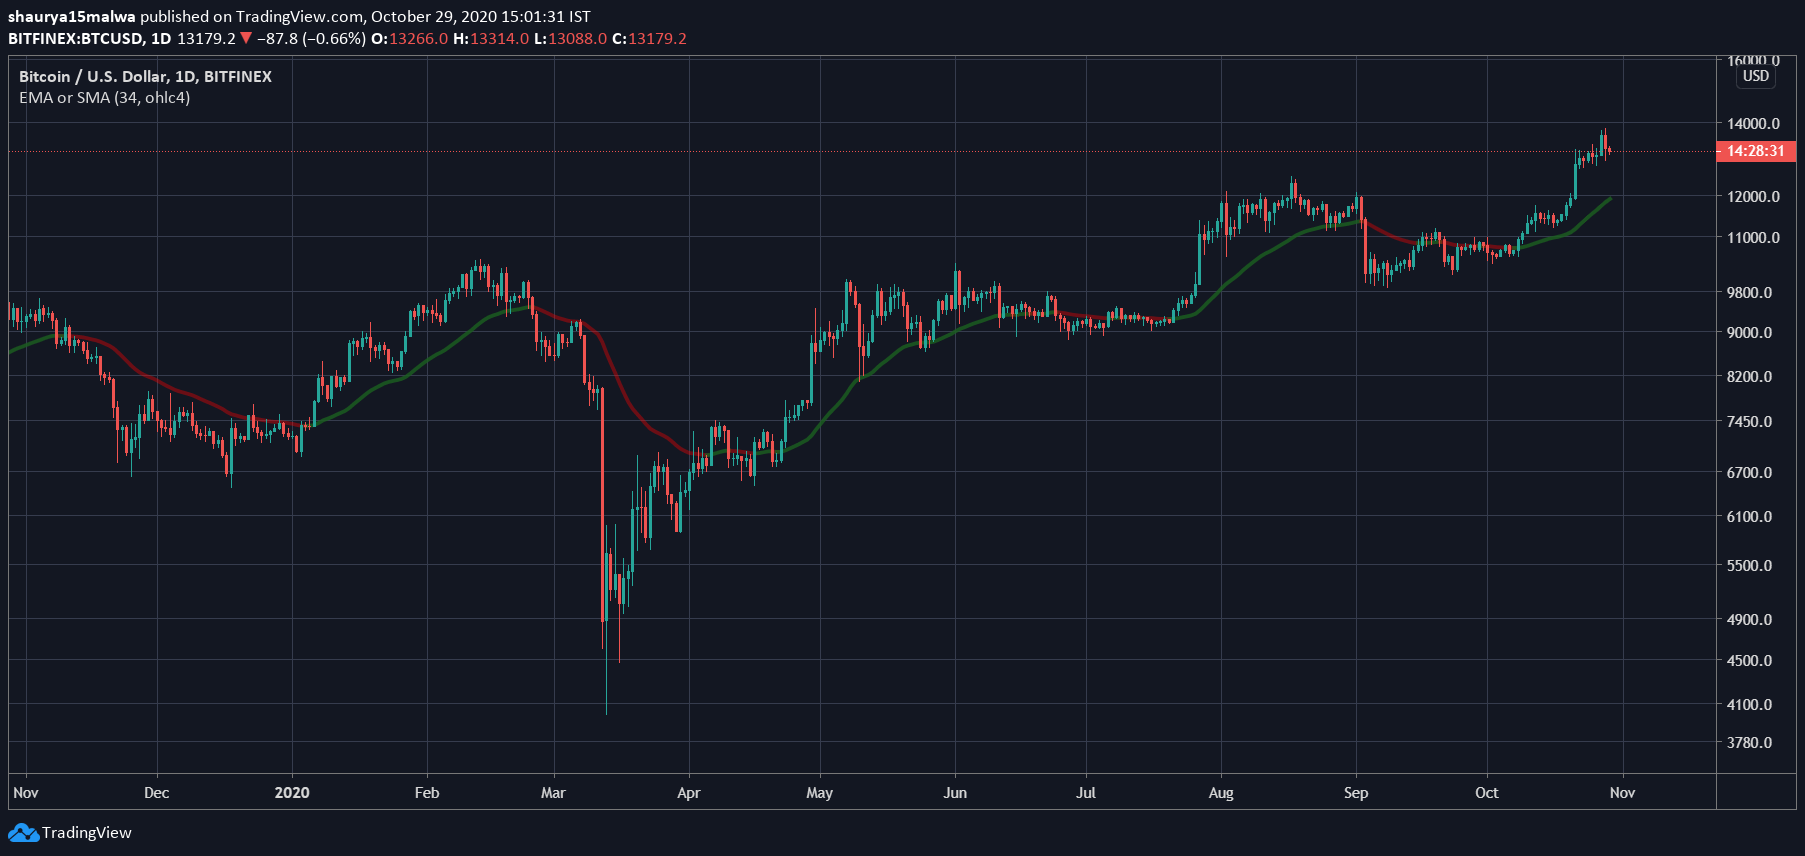 Bitcoin's has gained over 300% to investors since March. Image: TradingView